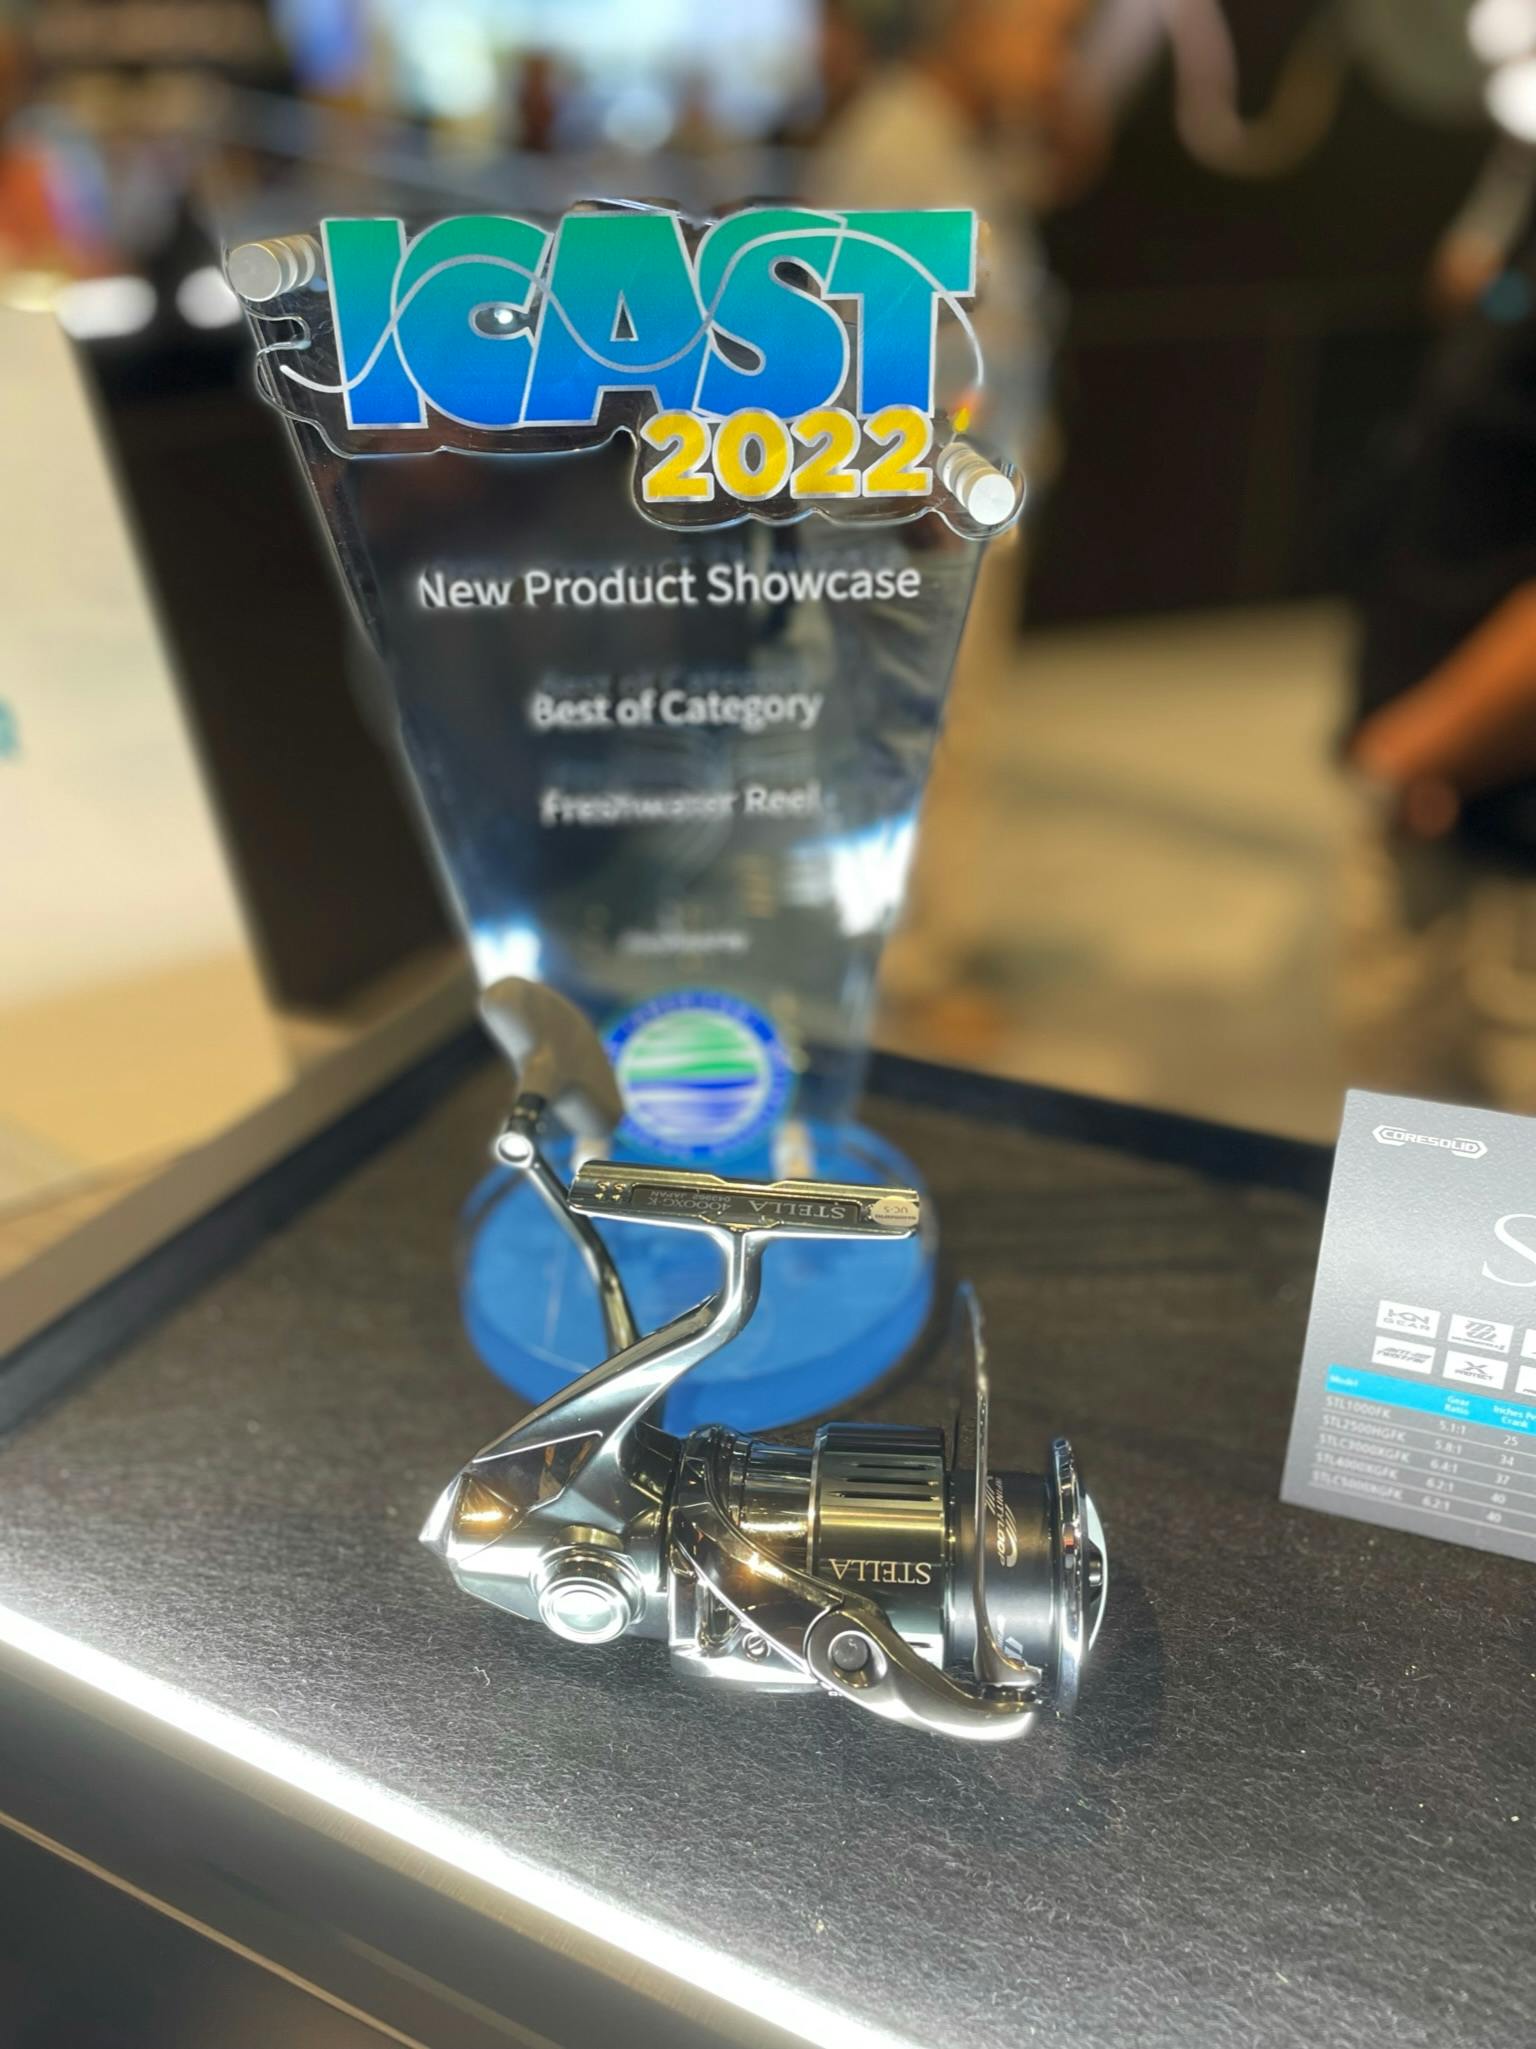 The Best of Category award on display at ICAST 2022